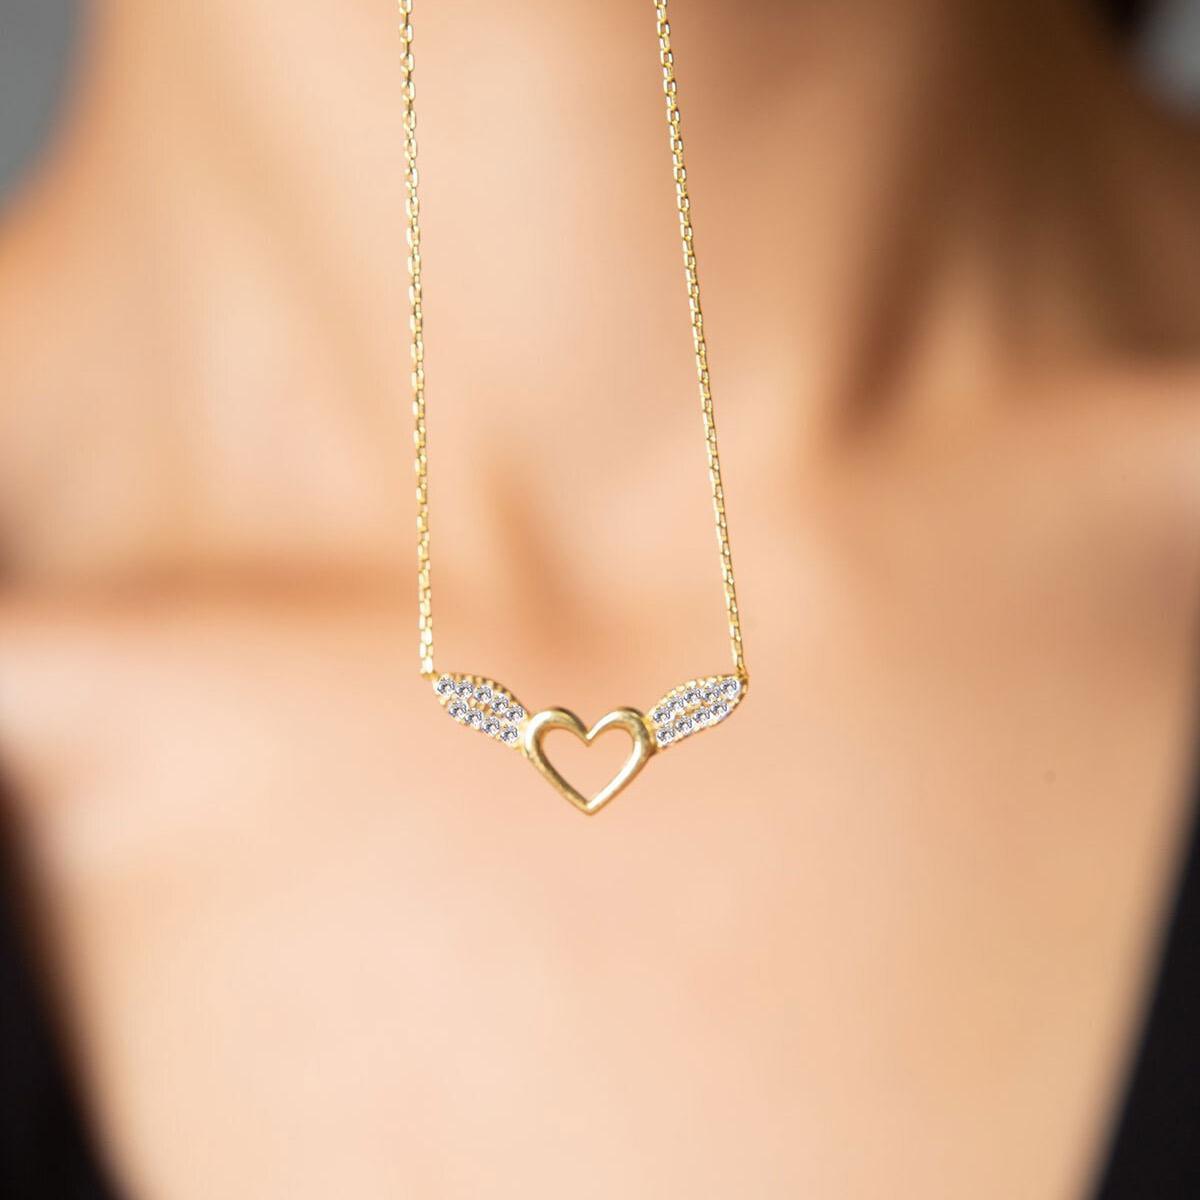 Heart Necklace Diamond • Angels Wings Necklace • Angel Necklace Silver - Trending Silver Gifts